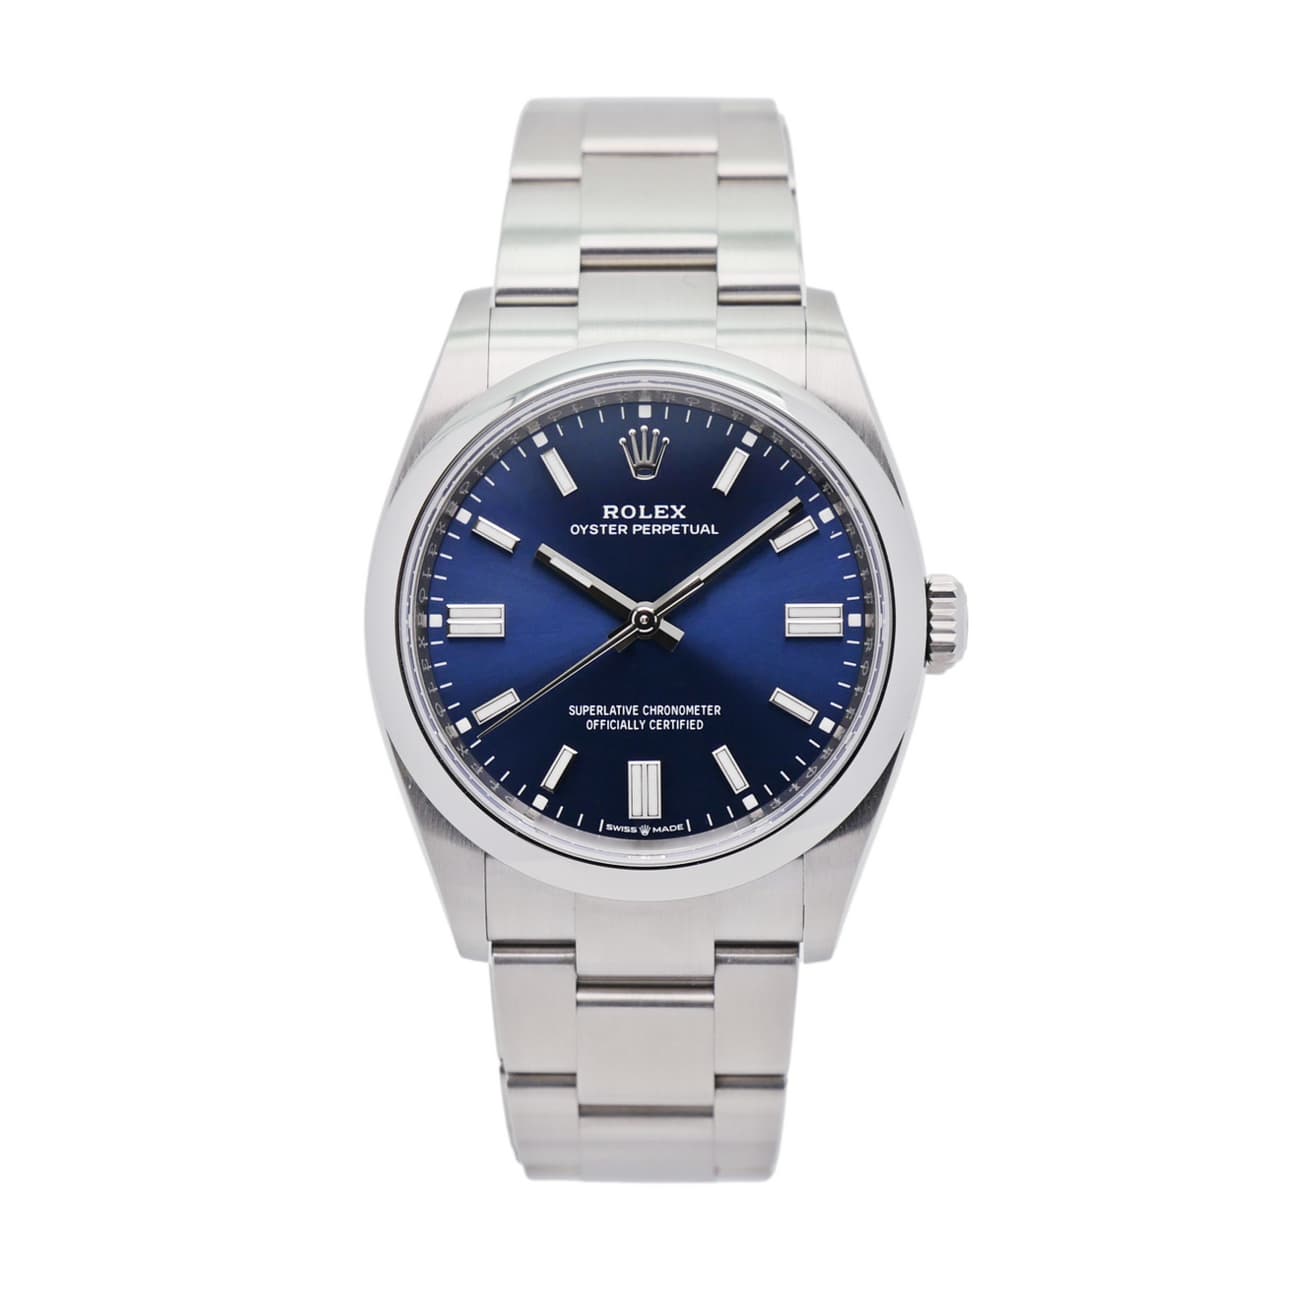 ROLEX OYSTER PERPETUAL 36 STAHL